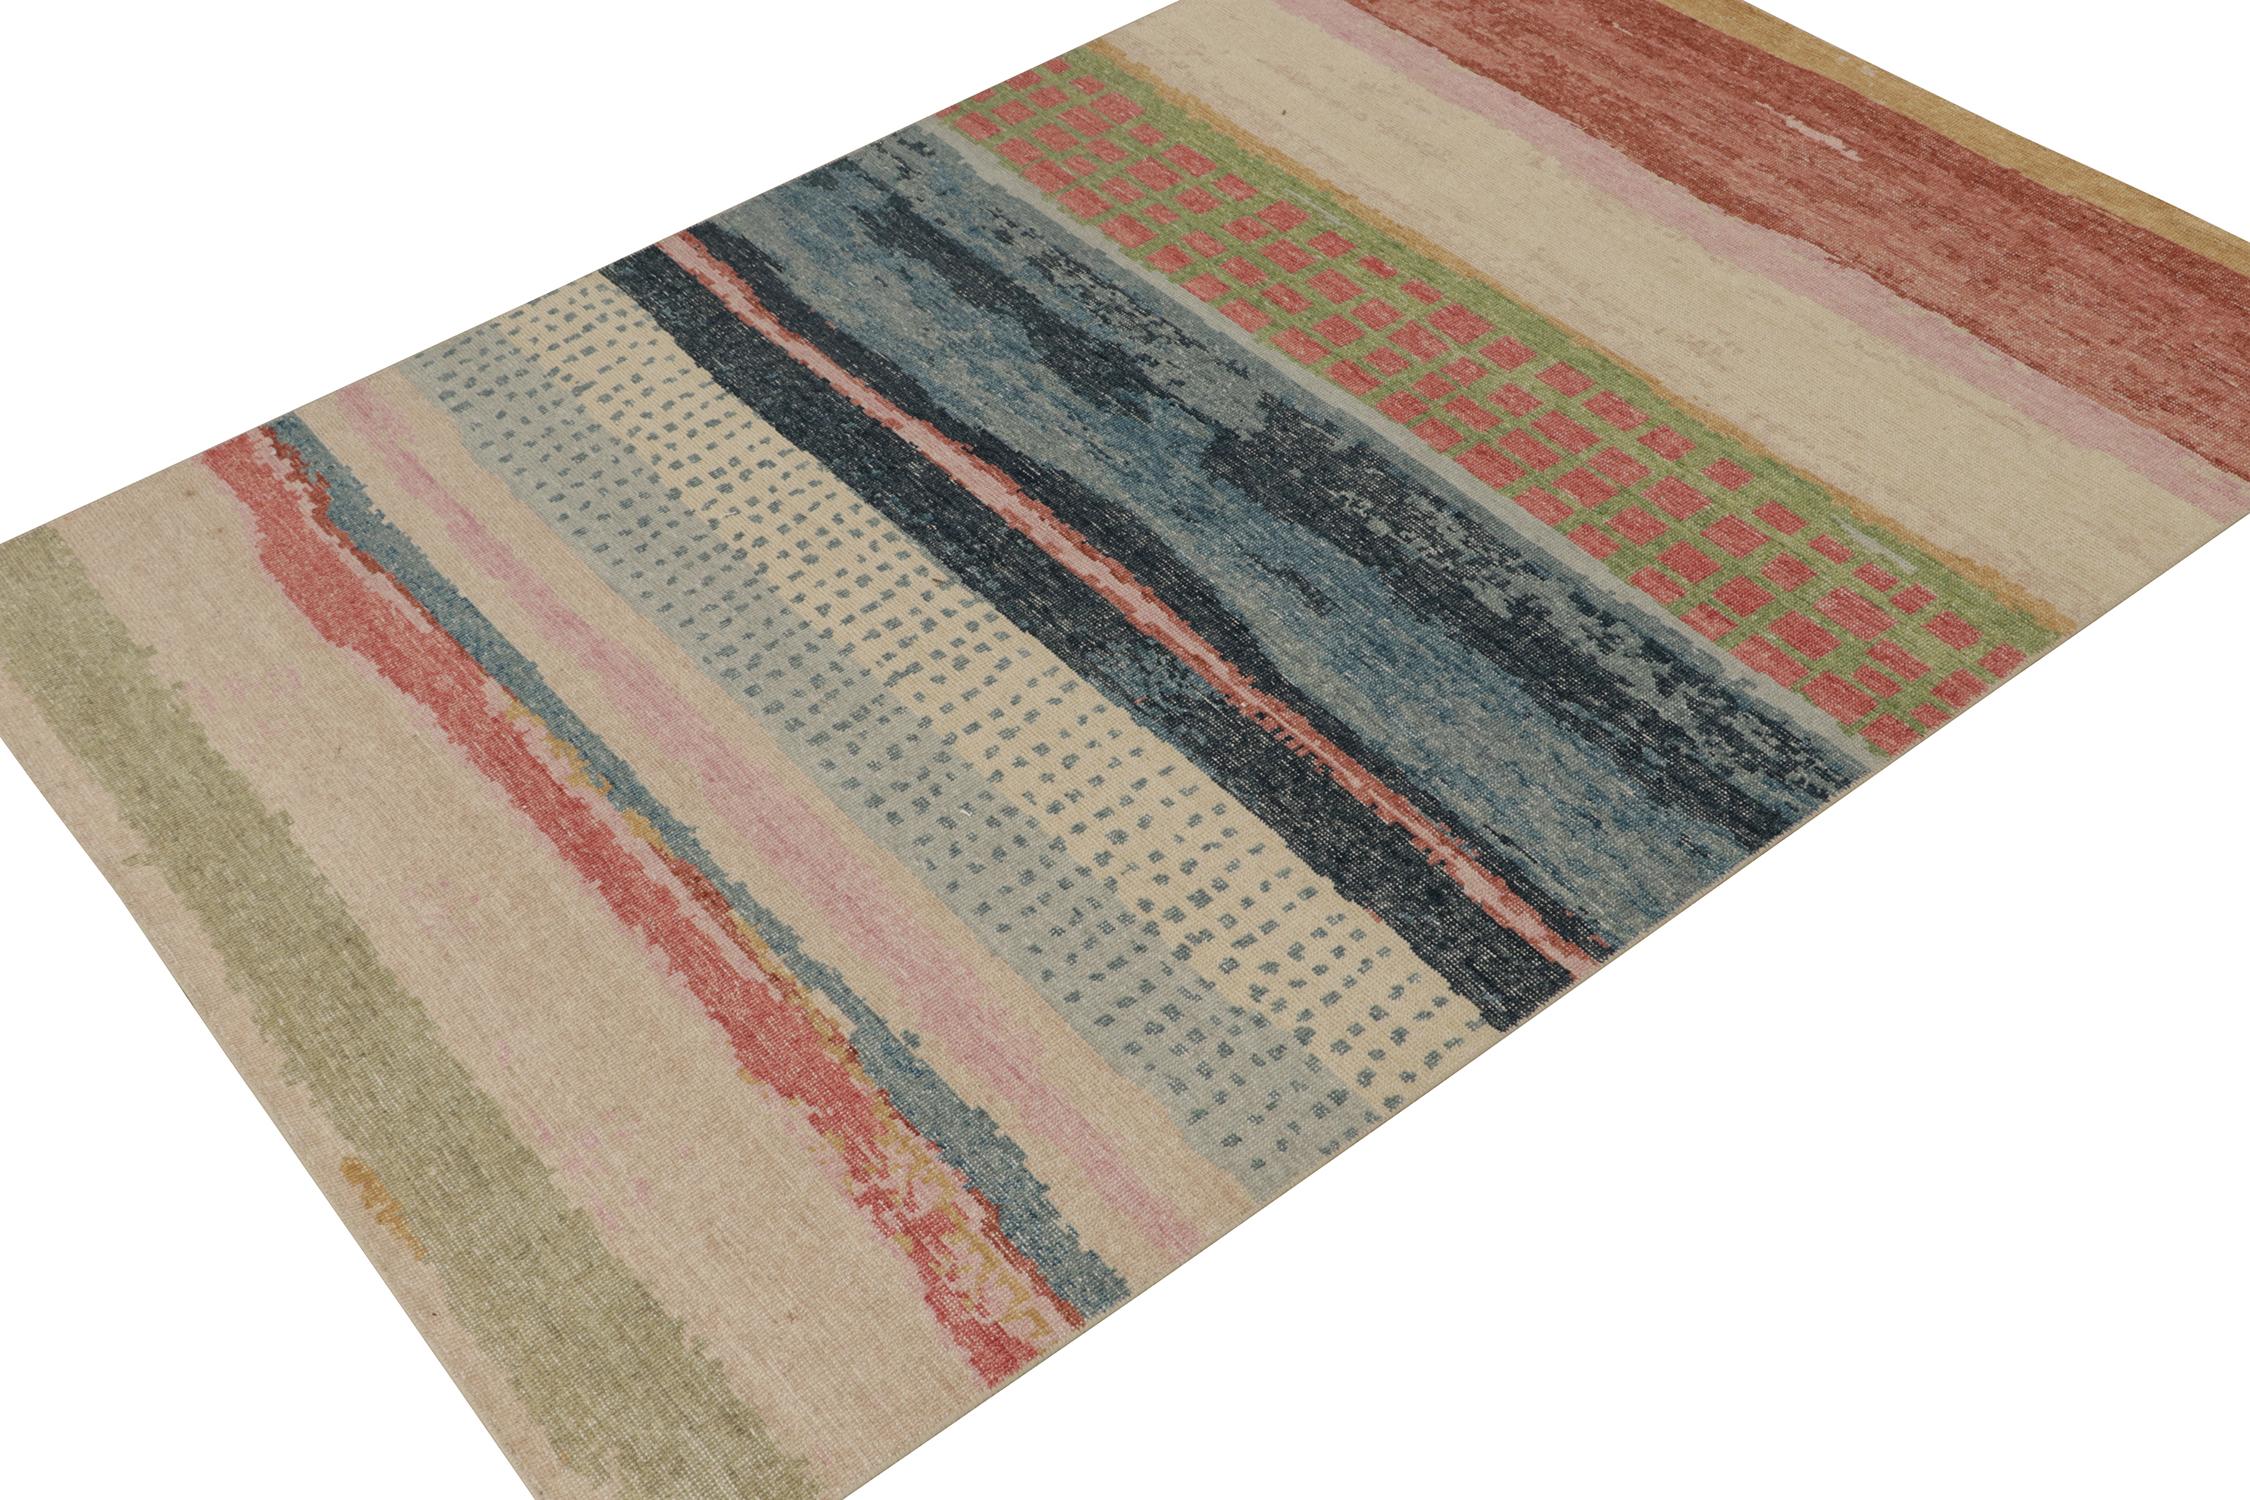 This contemporary 6x9 abstract rug is a new addition to the Homage Collection by Rug & Kilim. Hand-knotted in wool and cotton.

Further On the Design:

This design enjoys a splash of colors with horizontal stripes, dots, and other painterly